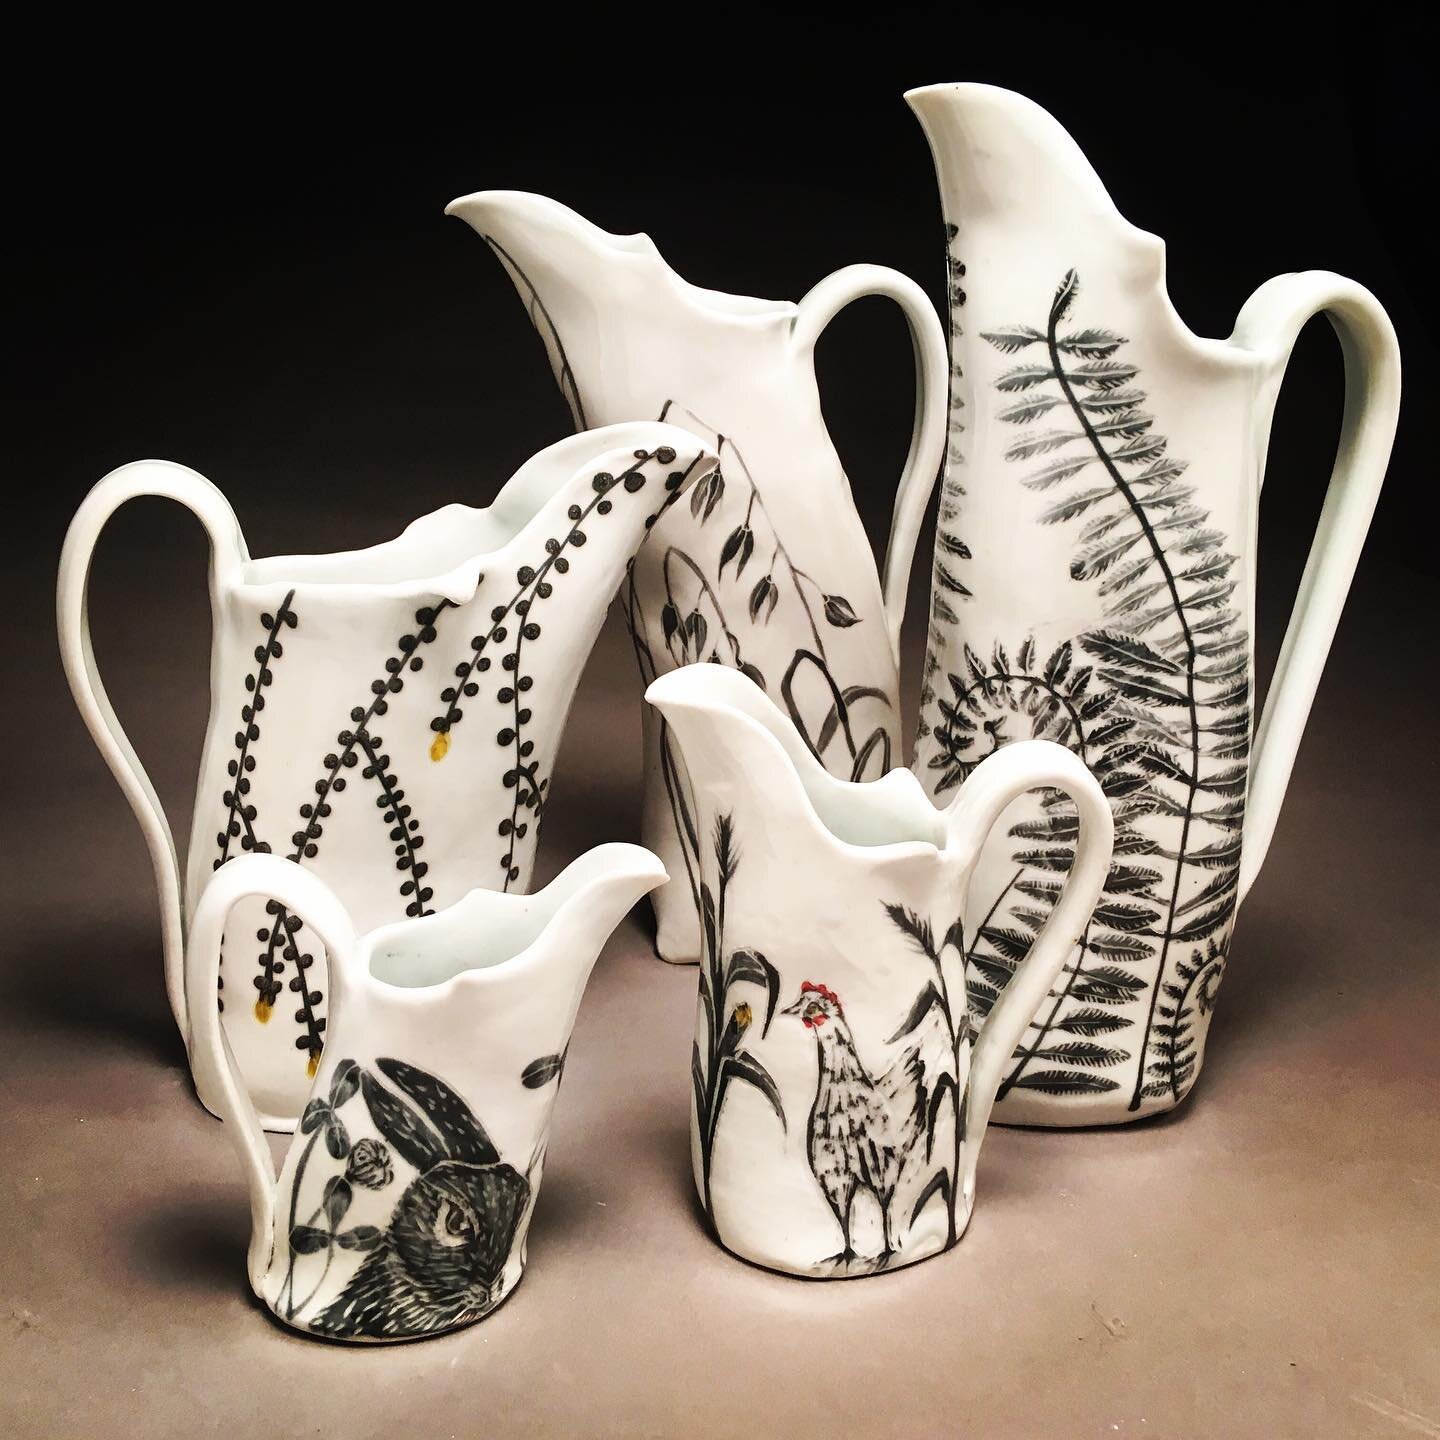 💥Saturday, June 5💥
Glynnis Lessing demonstrates how she decorates these pitcher forms! The workshop includes templates on how she handbuilds them from porcelain!
&bull;
12noon to 2pm on Zoom
&bull;
45💵
&bull;
Check out FrankArts.com for details! 
